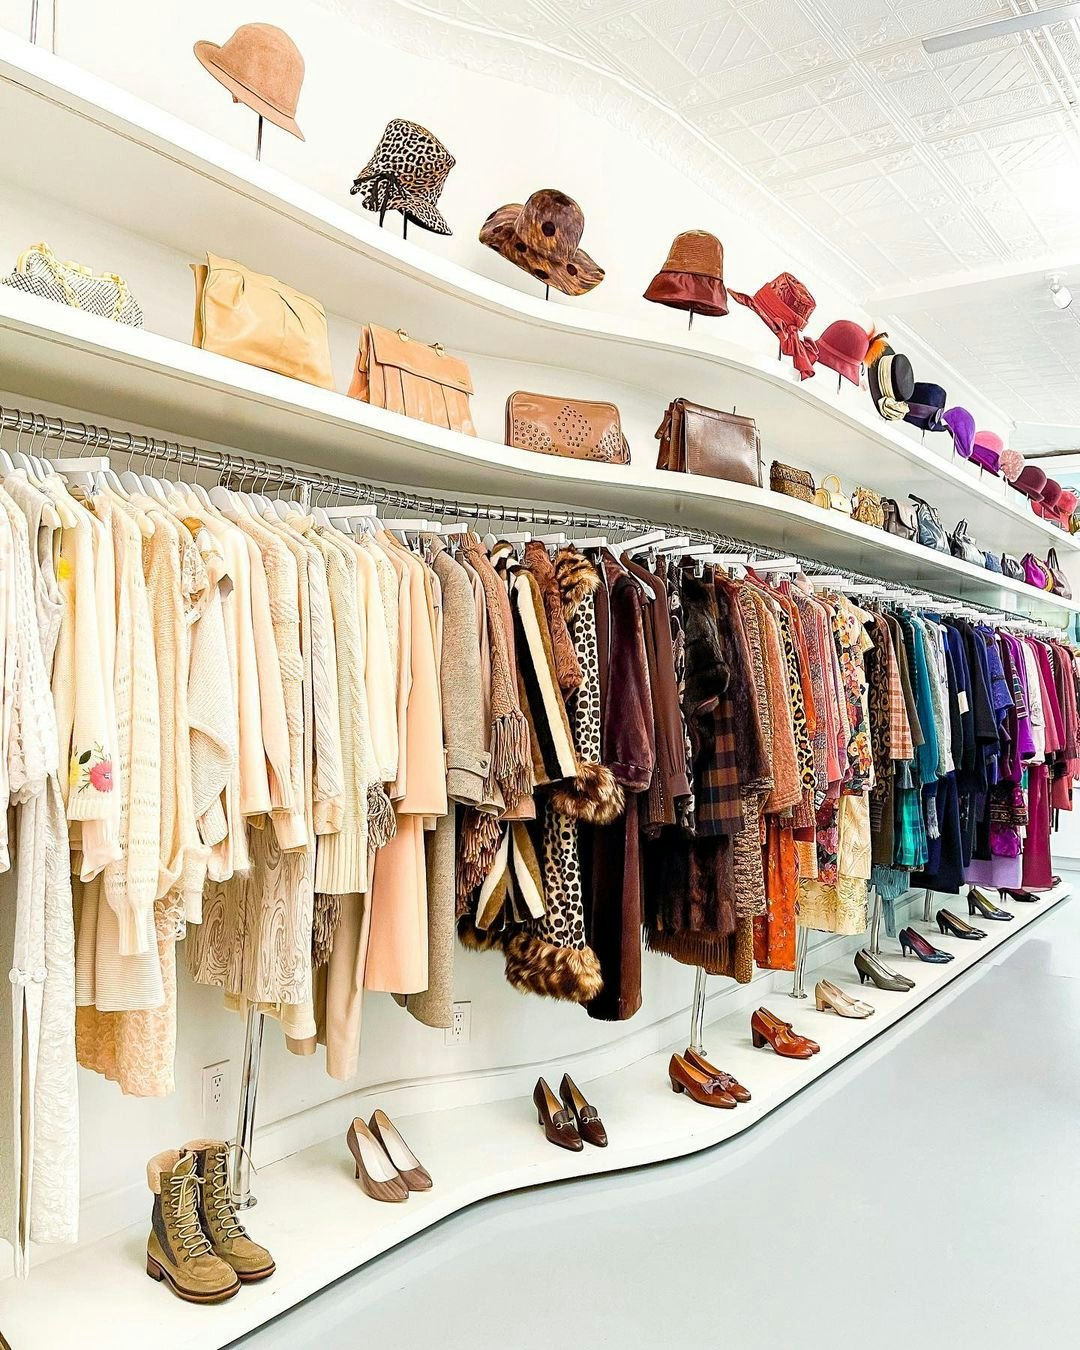 A Petite Women's Guide to Vintage Shopping - WardrobeShop - Blog